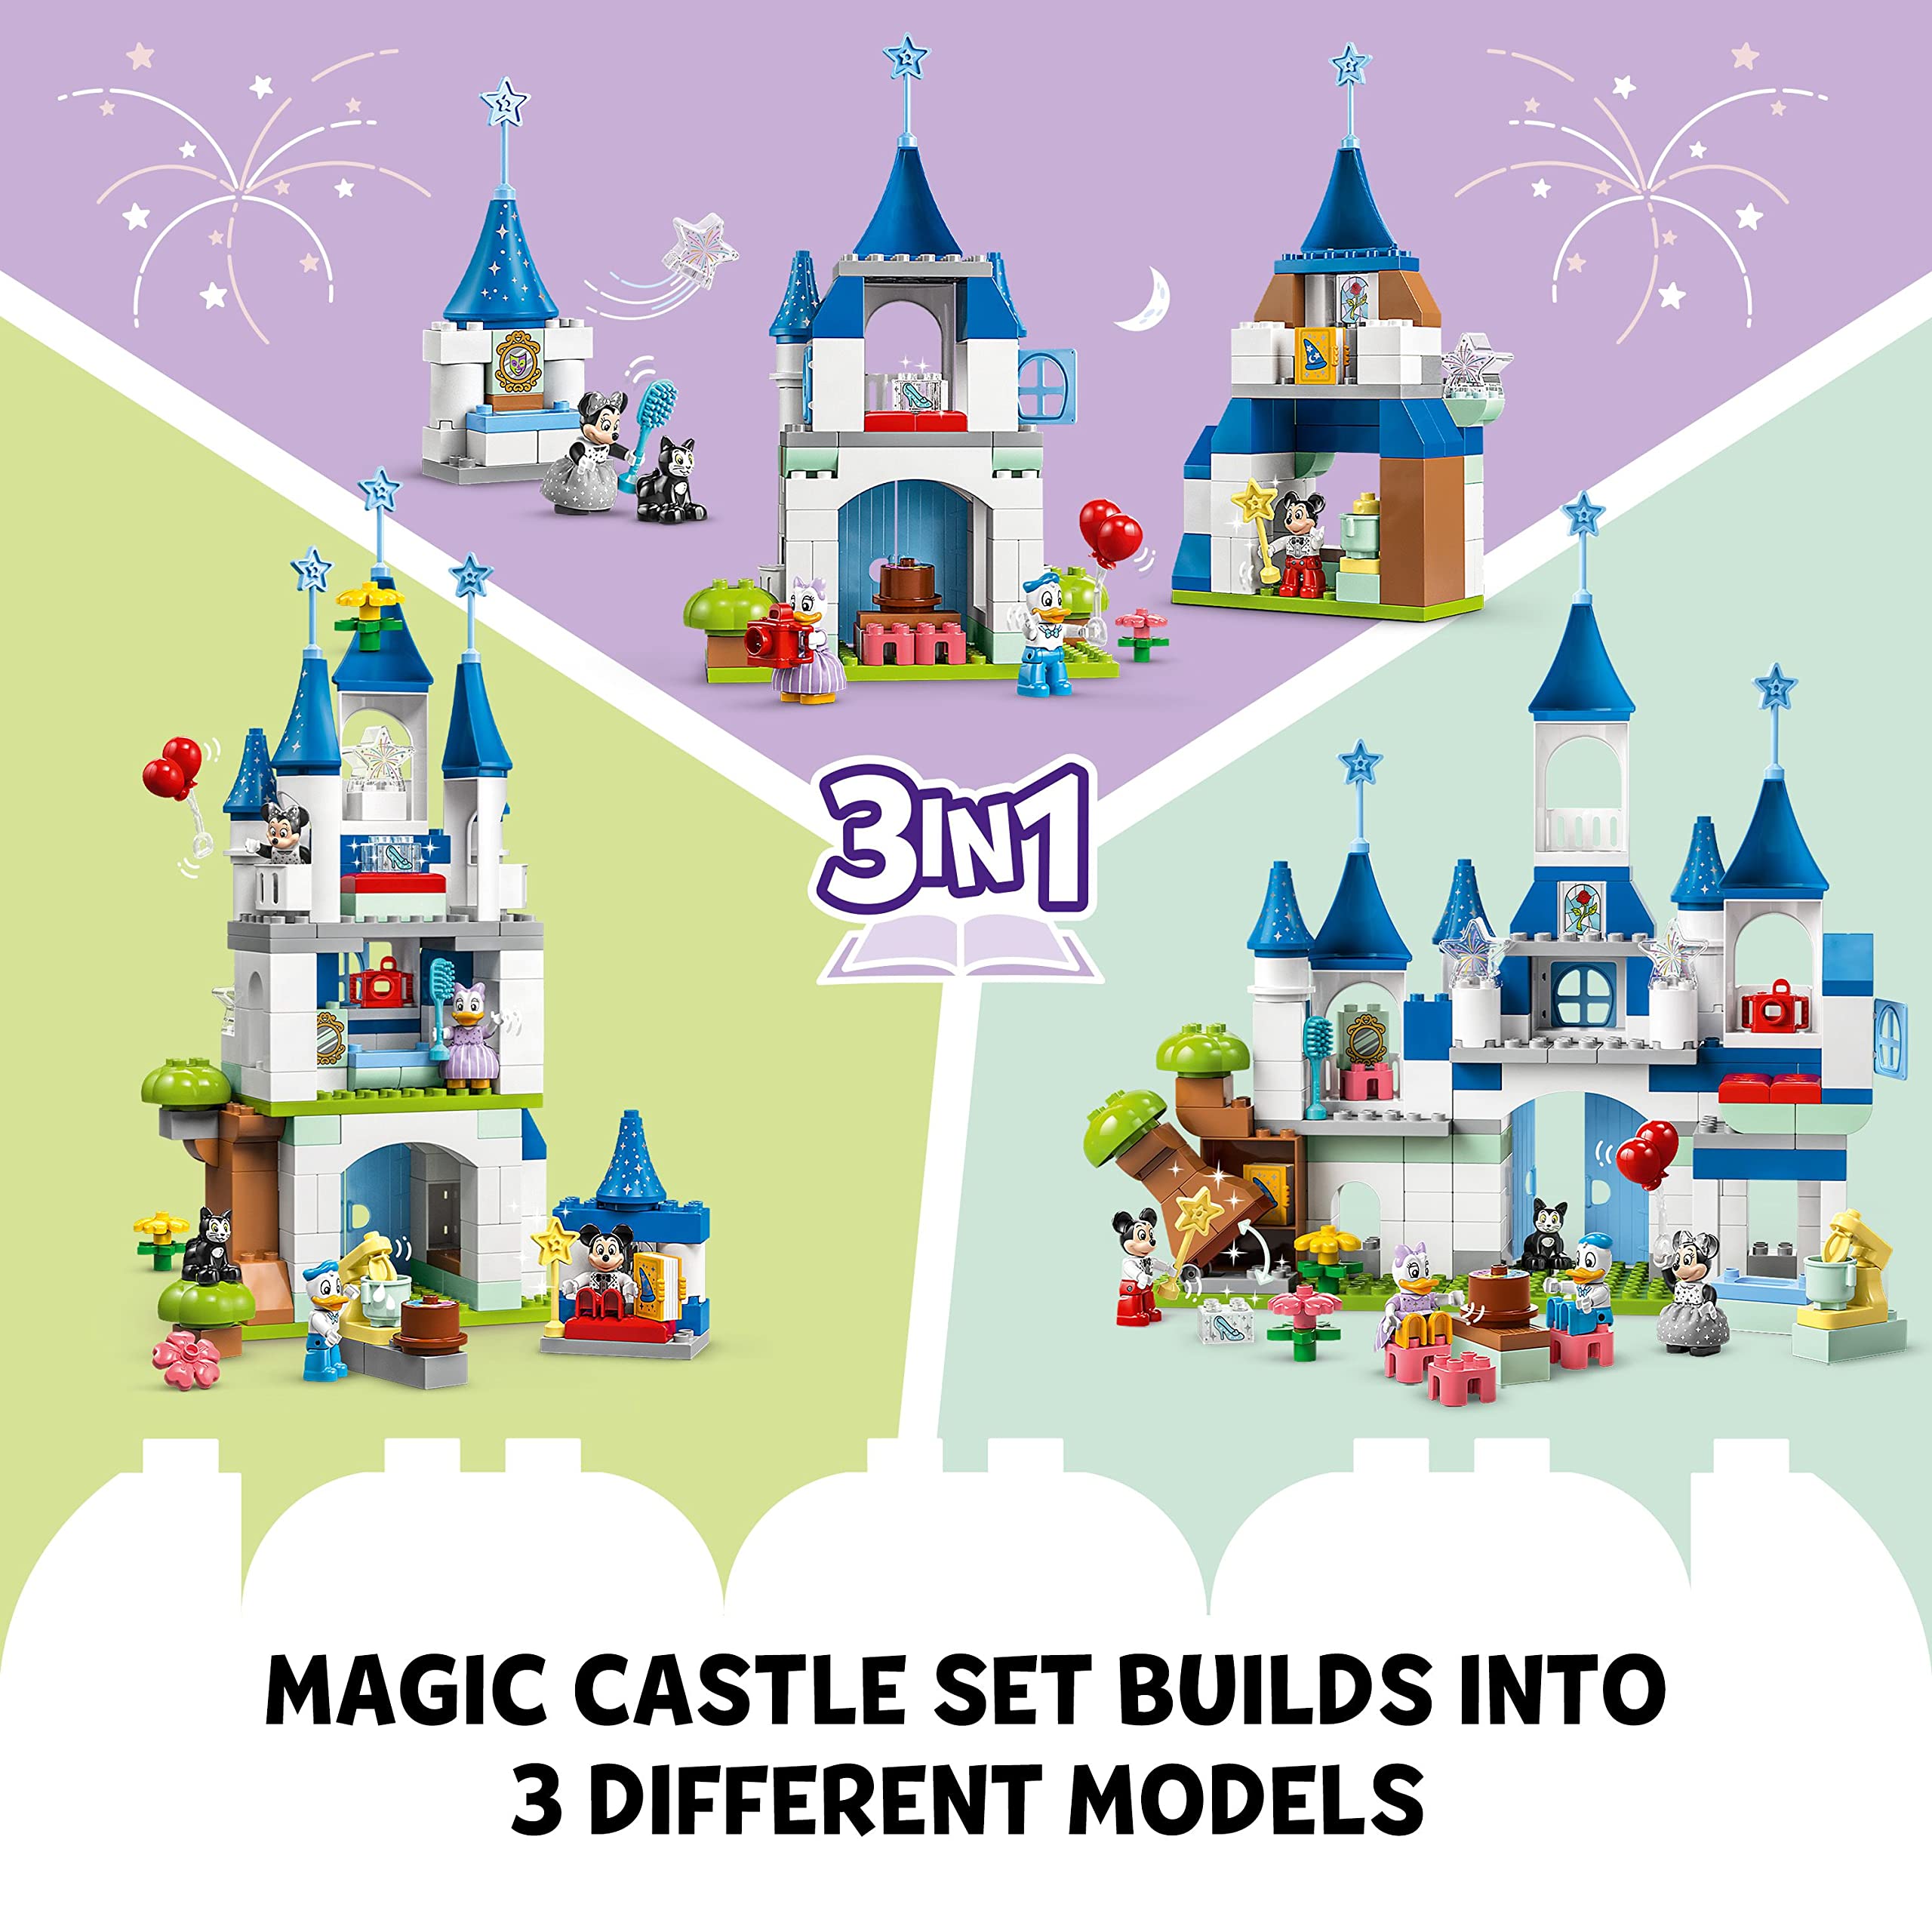 LEGO DUPLO Disney 3 in 1 Magic Castle 10998 Building Set for Family Play with 5 Disney Figures Including Mickey, Minnie and Friends, Magical Disney 100 for Kids & Toddlers Ages 3 and Up